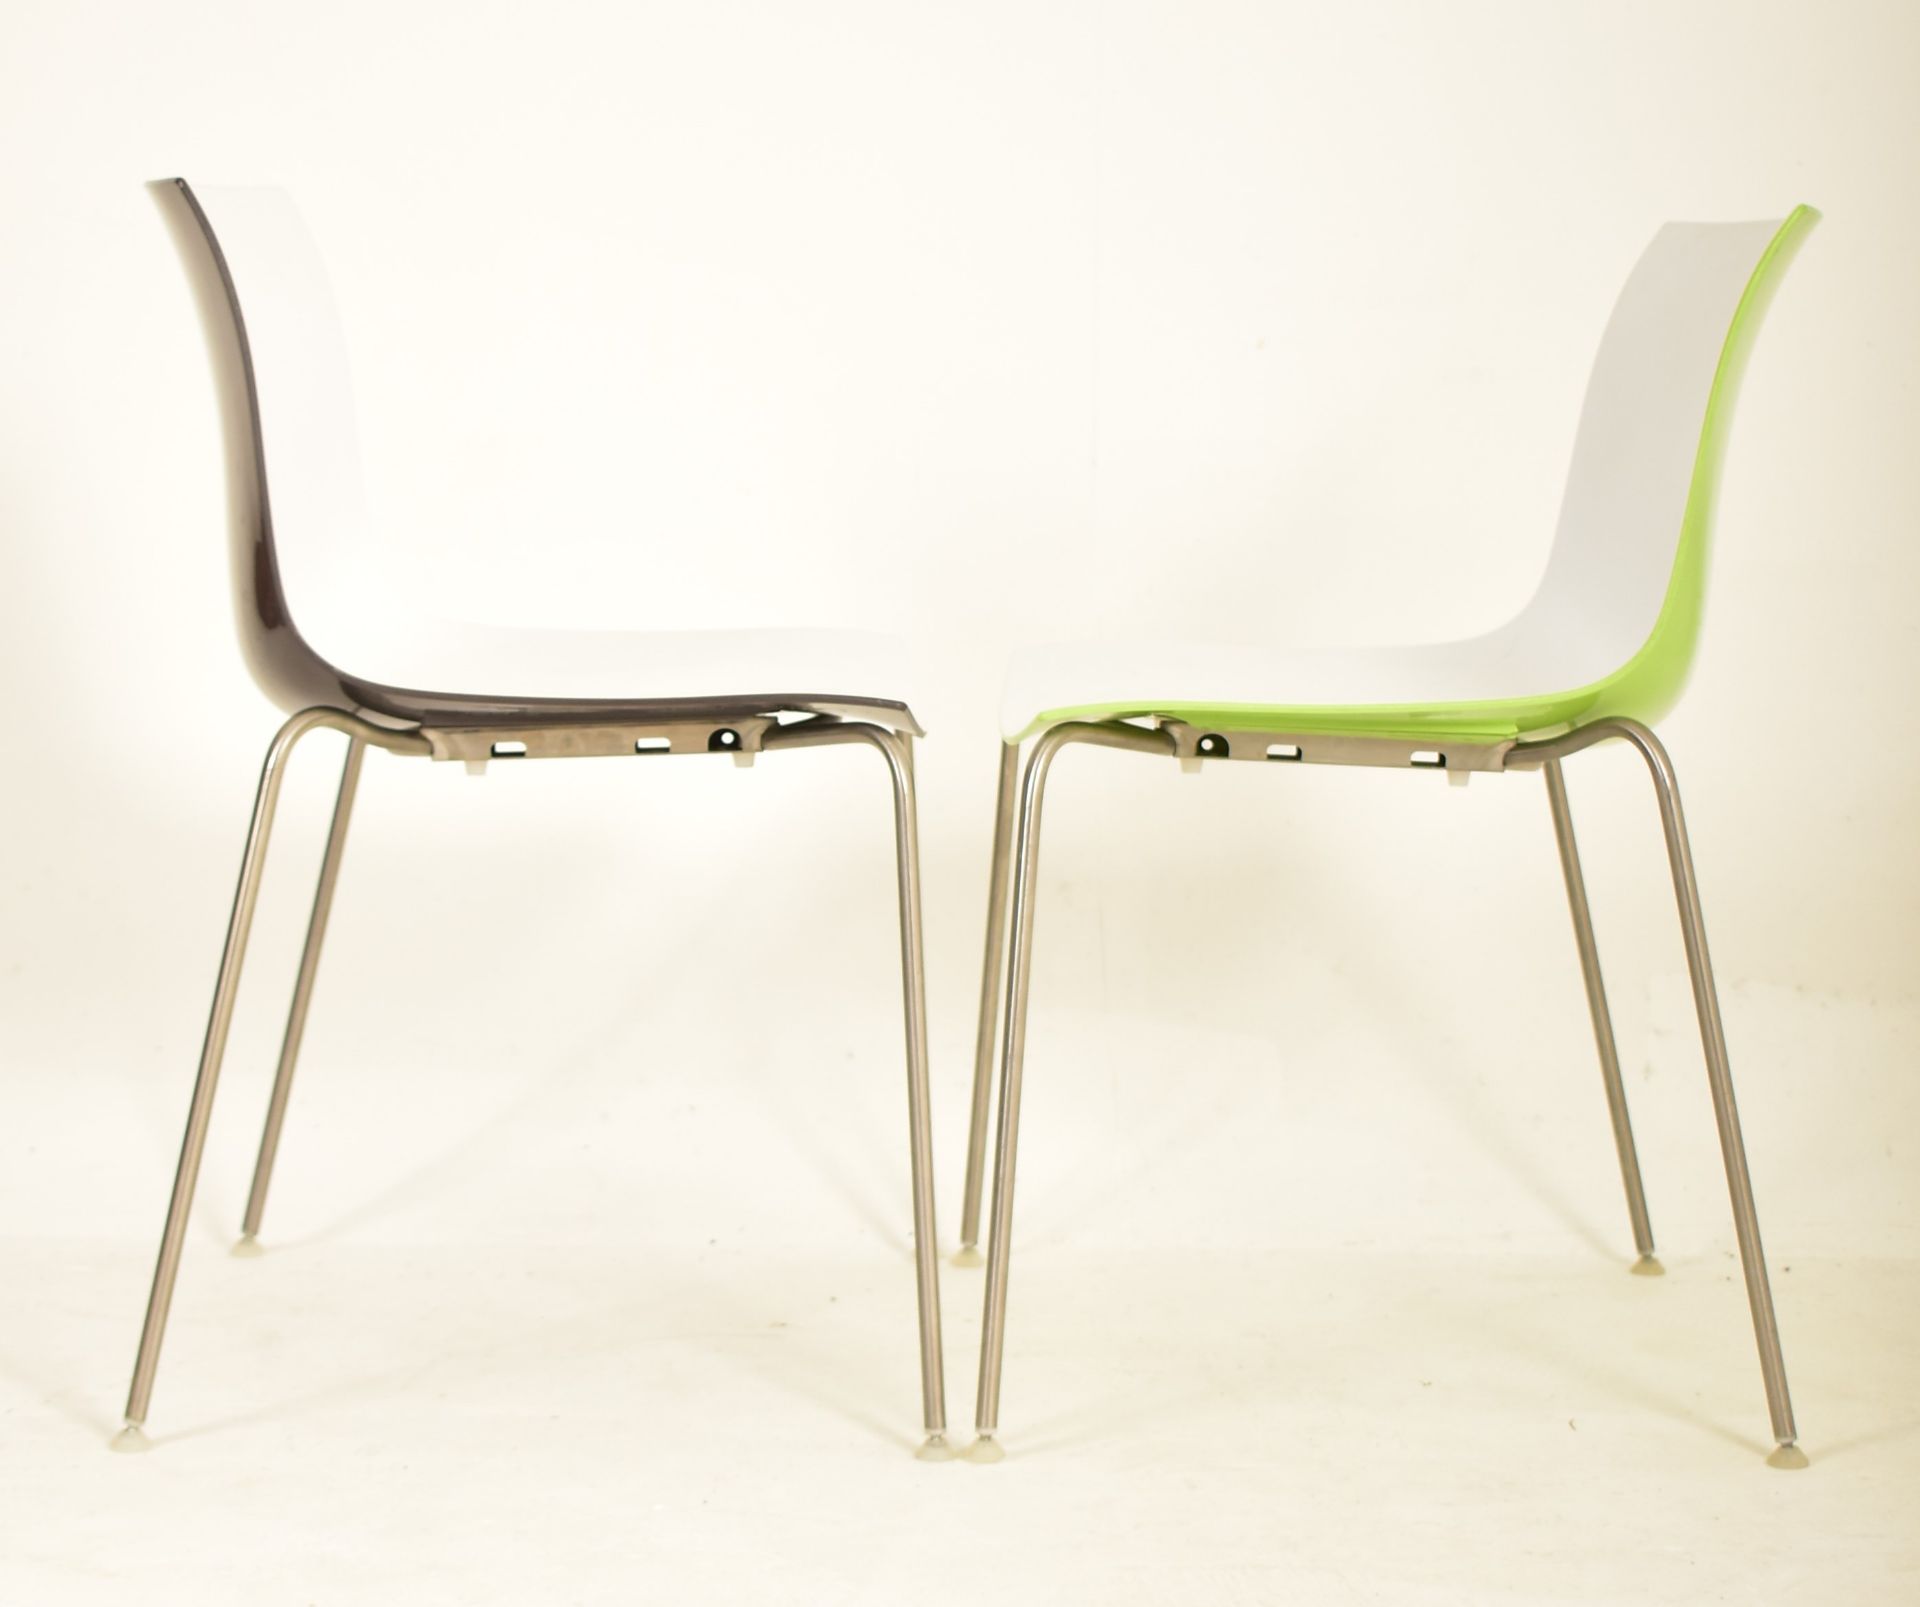 LIEVORE MOLINA X ARPER - CATIFA 46 - SEVEN STACKING CHAIRS - Image 5 of 6